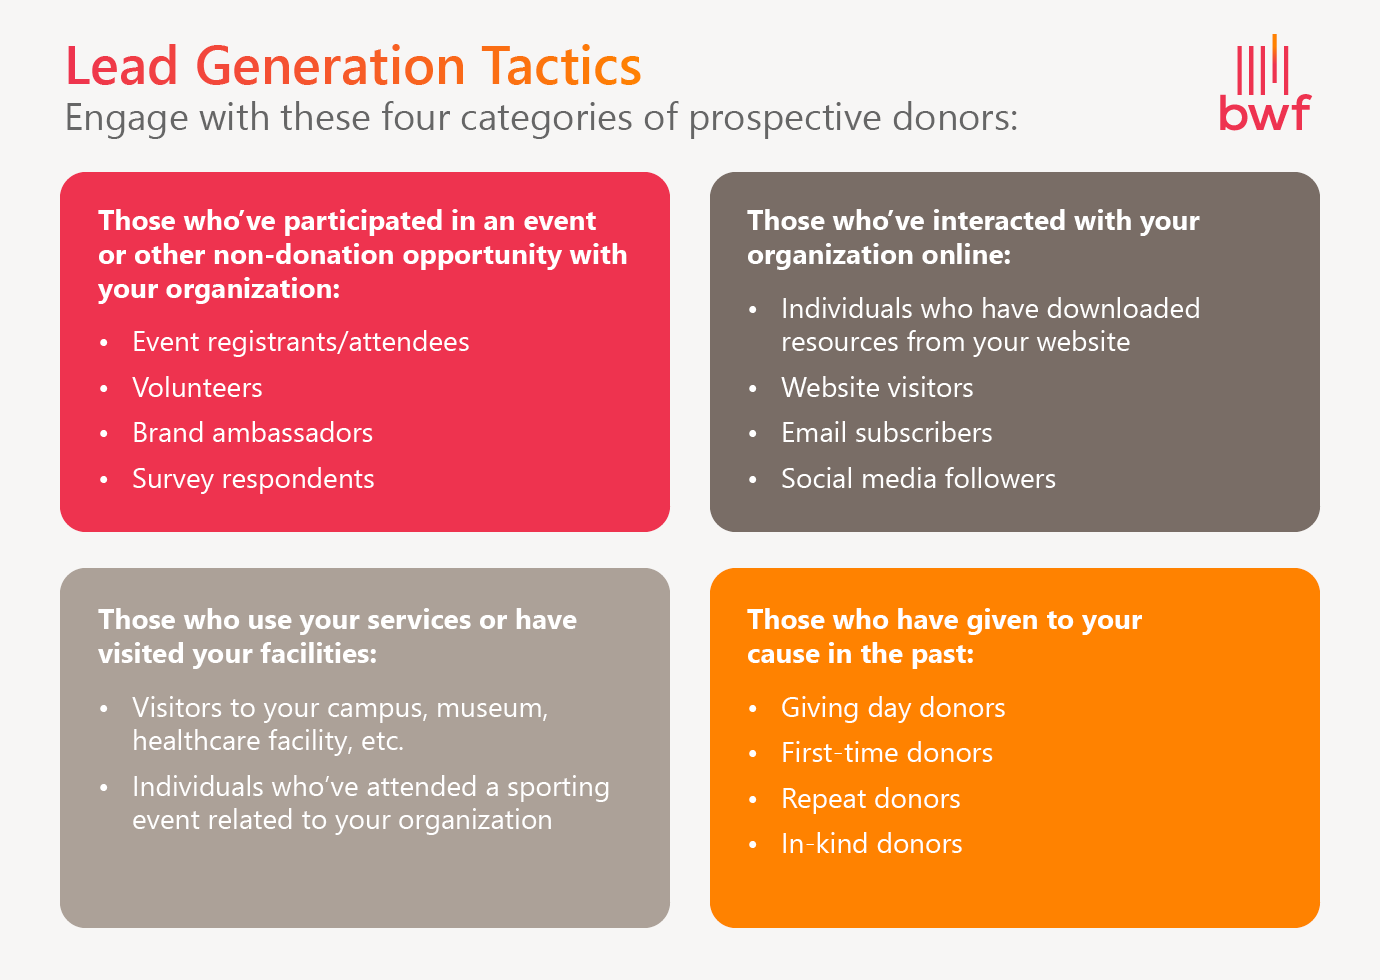 These are a few lead generation ideas for your annual giving campaign.